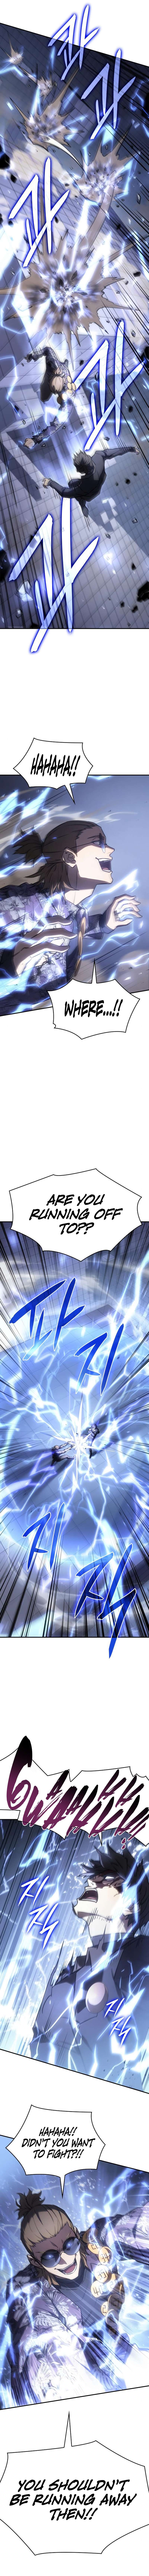 Regressing With The King's Power - chapter 16 - #6